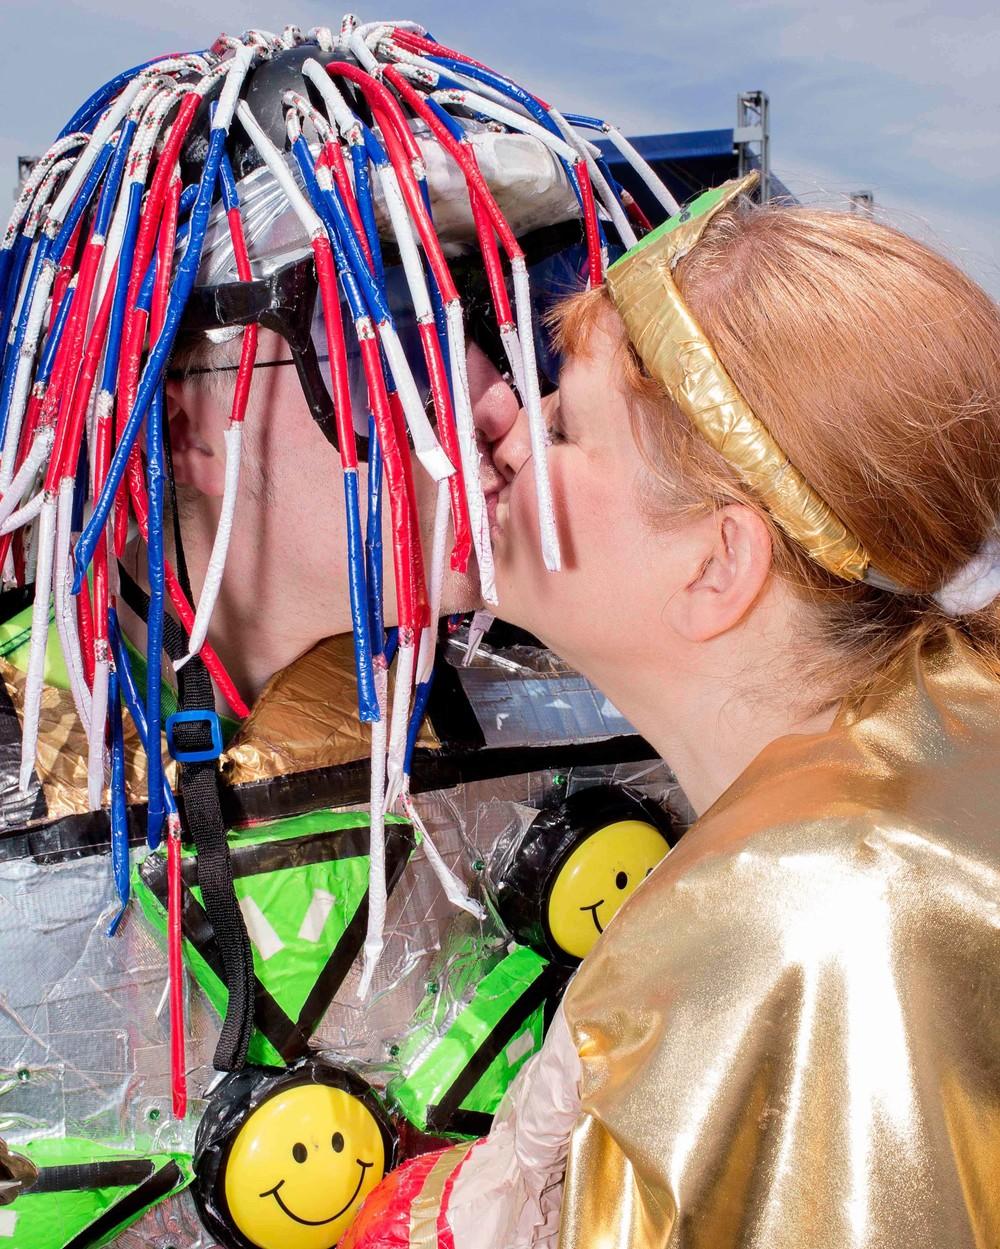 These Photos from a Duct Tape Festival in America Will Inspire You VICE